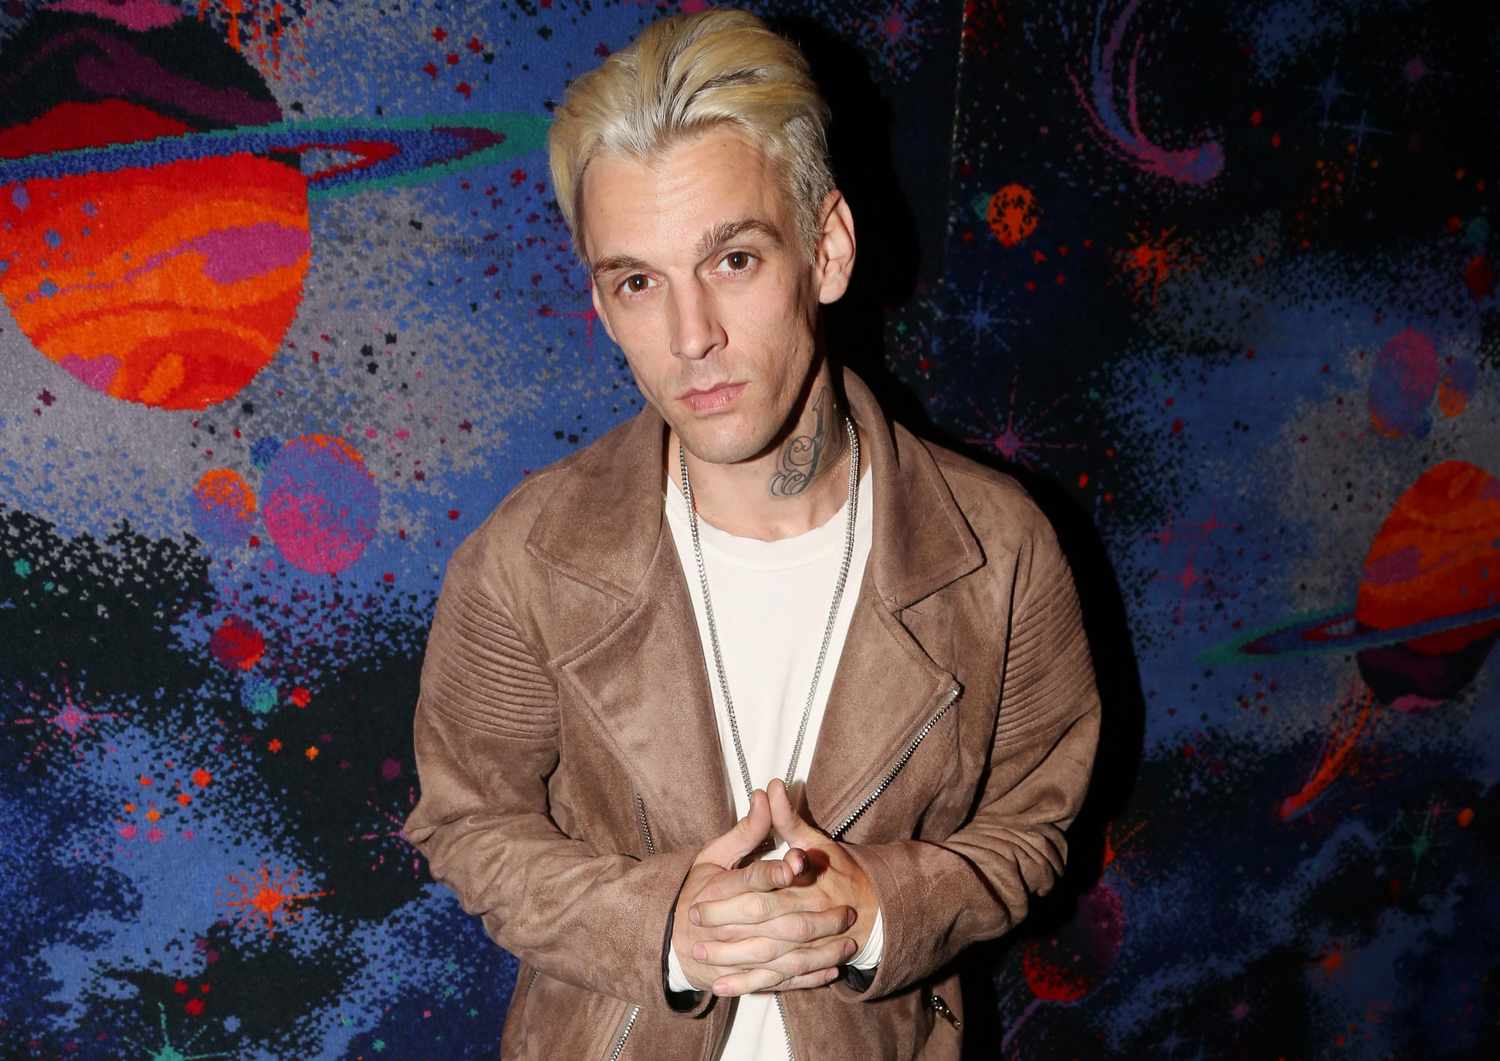 Aaron Carter died at age 34